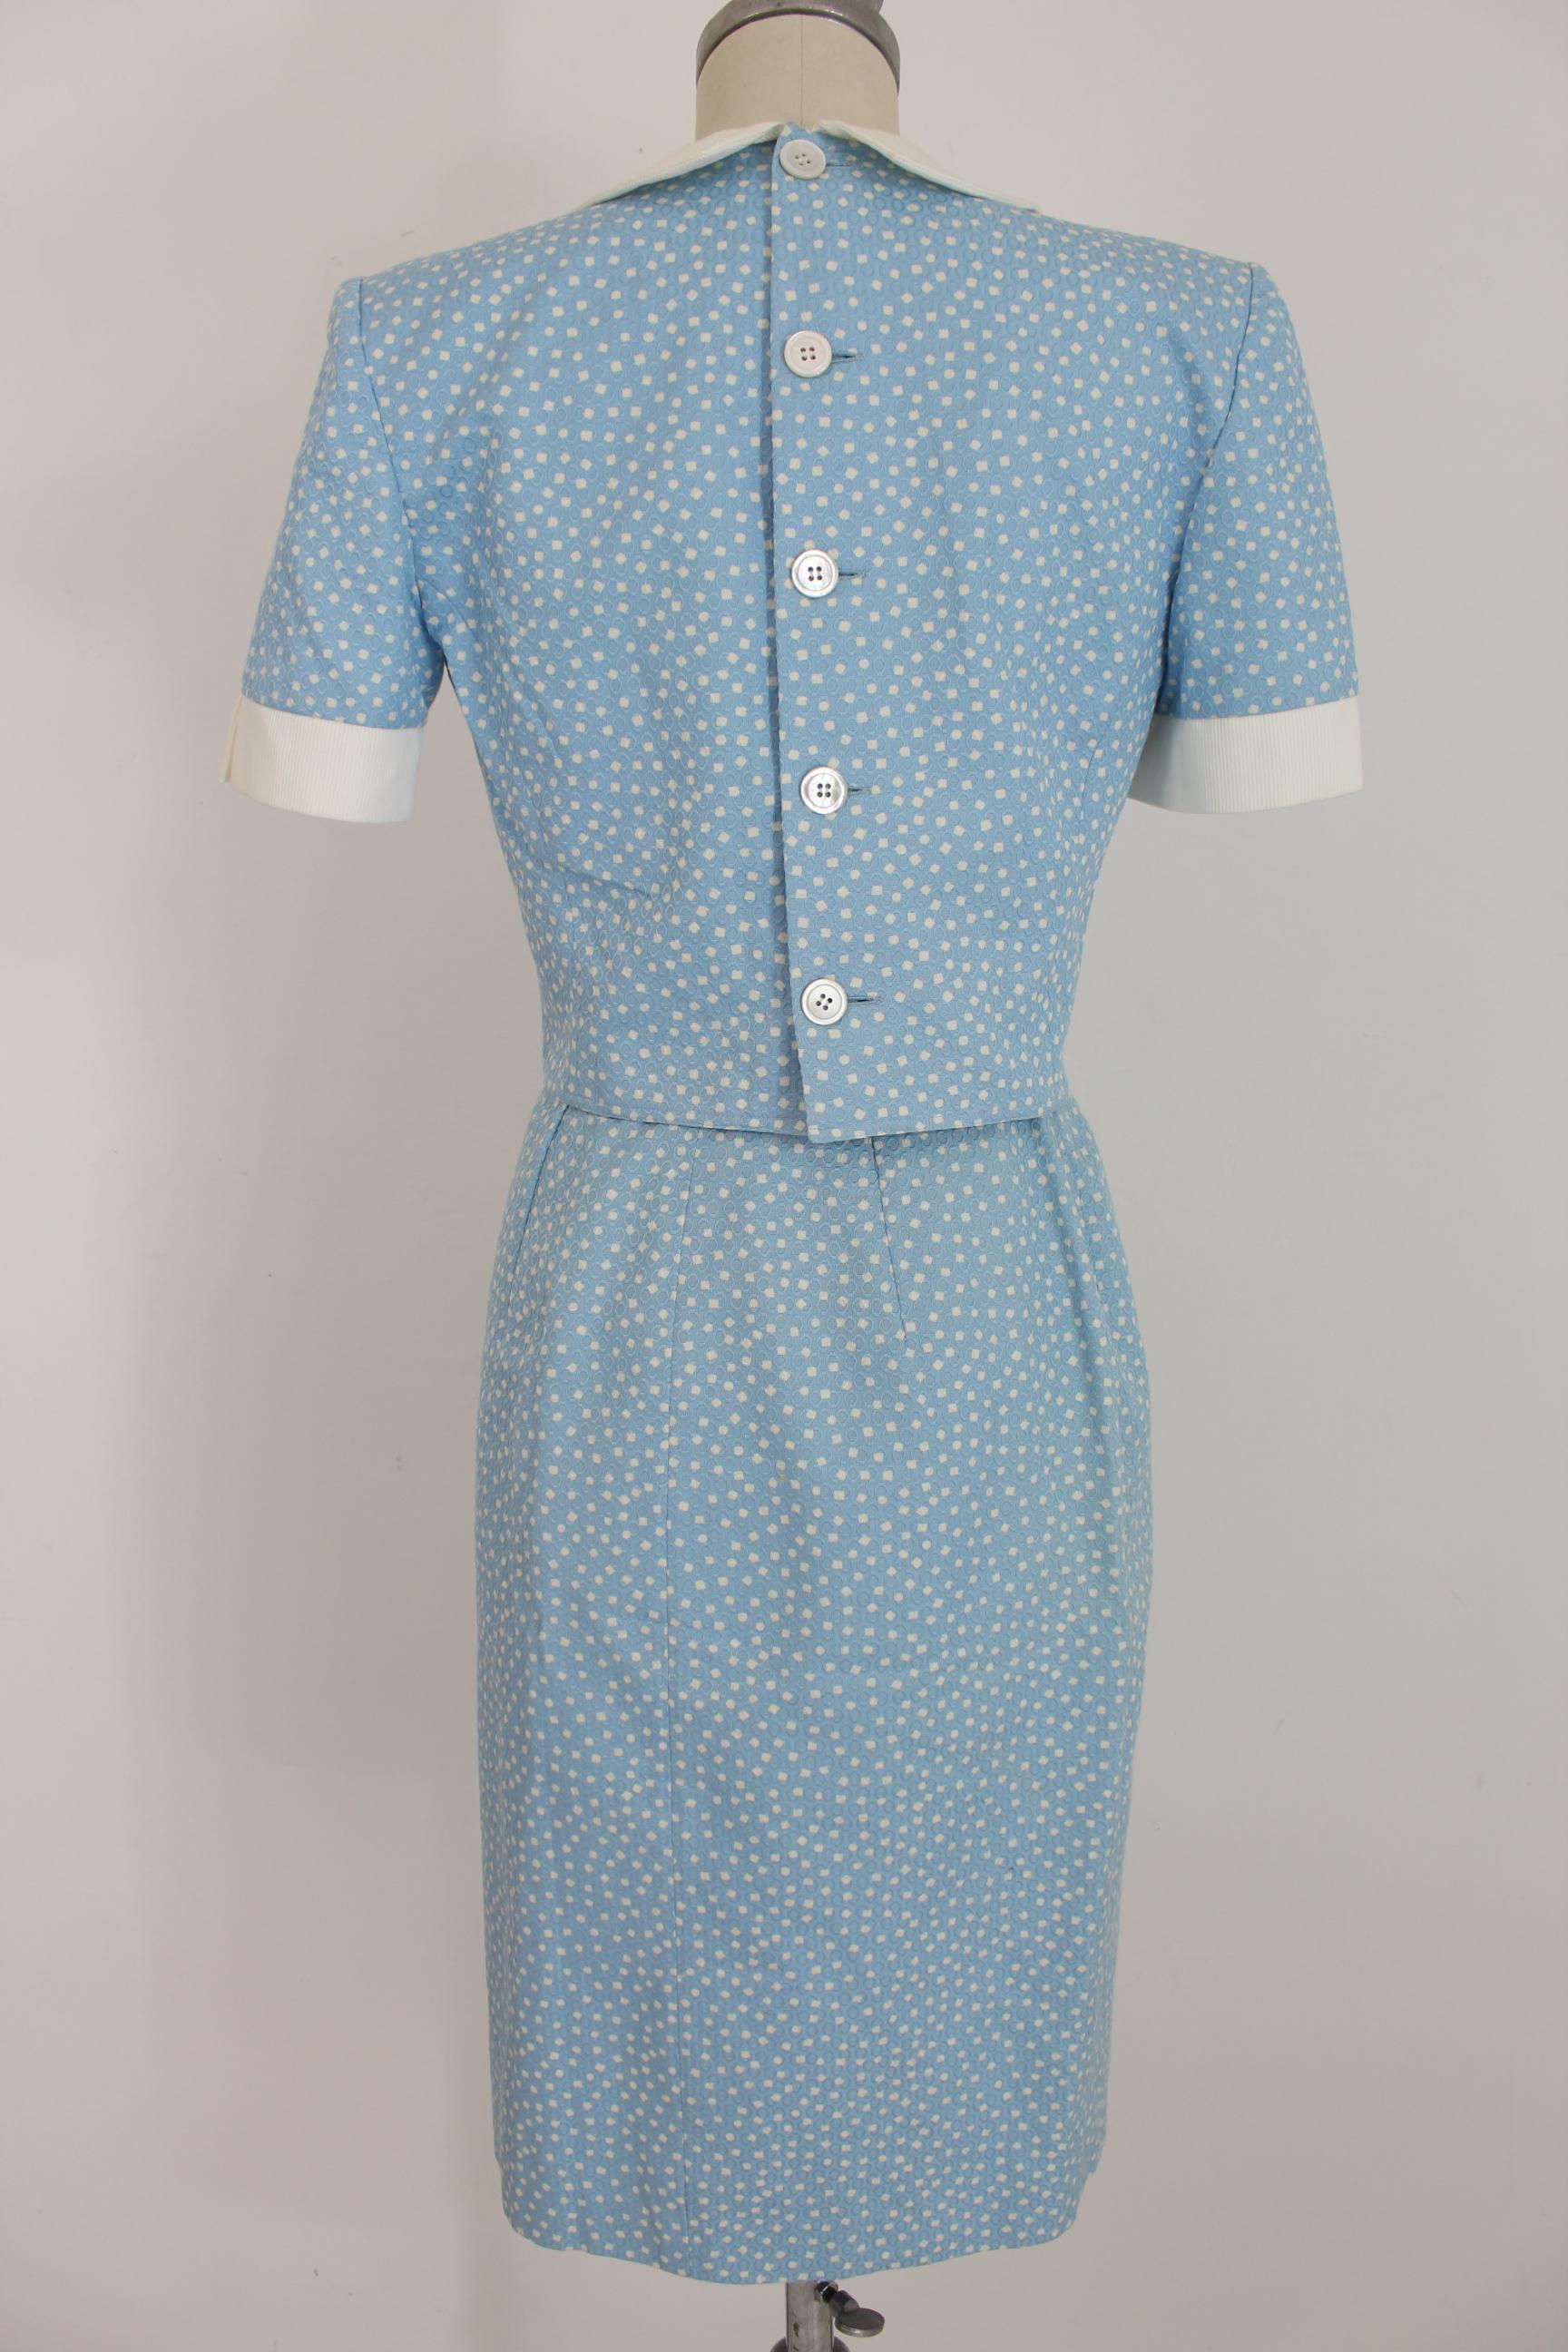 Valentino Miss V 90s vintage women's suit skirt. Short waist shirt with white collar, shoulder closure with buttons. Sheath type skirt, with closure along the entire skirt. Polka dot motif, blue and white color. 100% cotton. Made in Italy. Very good